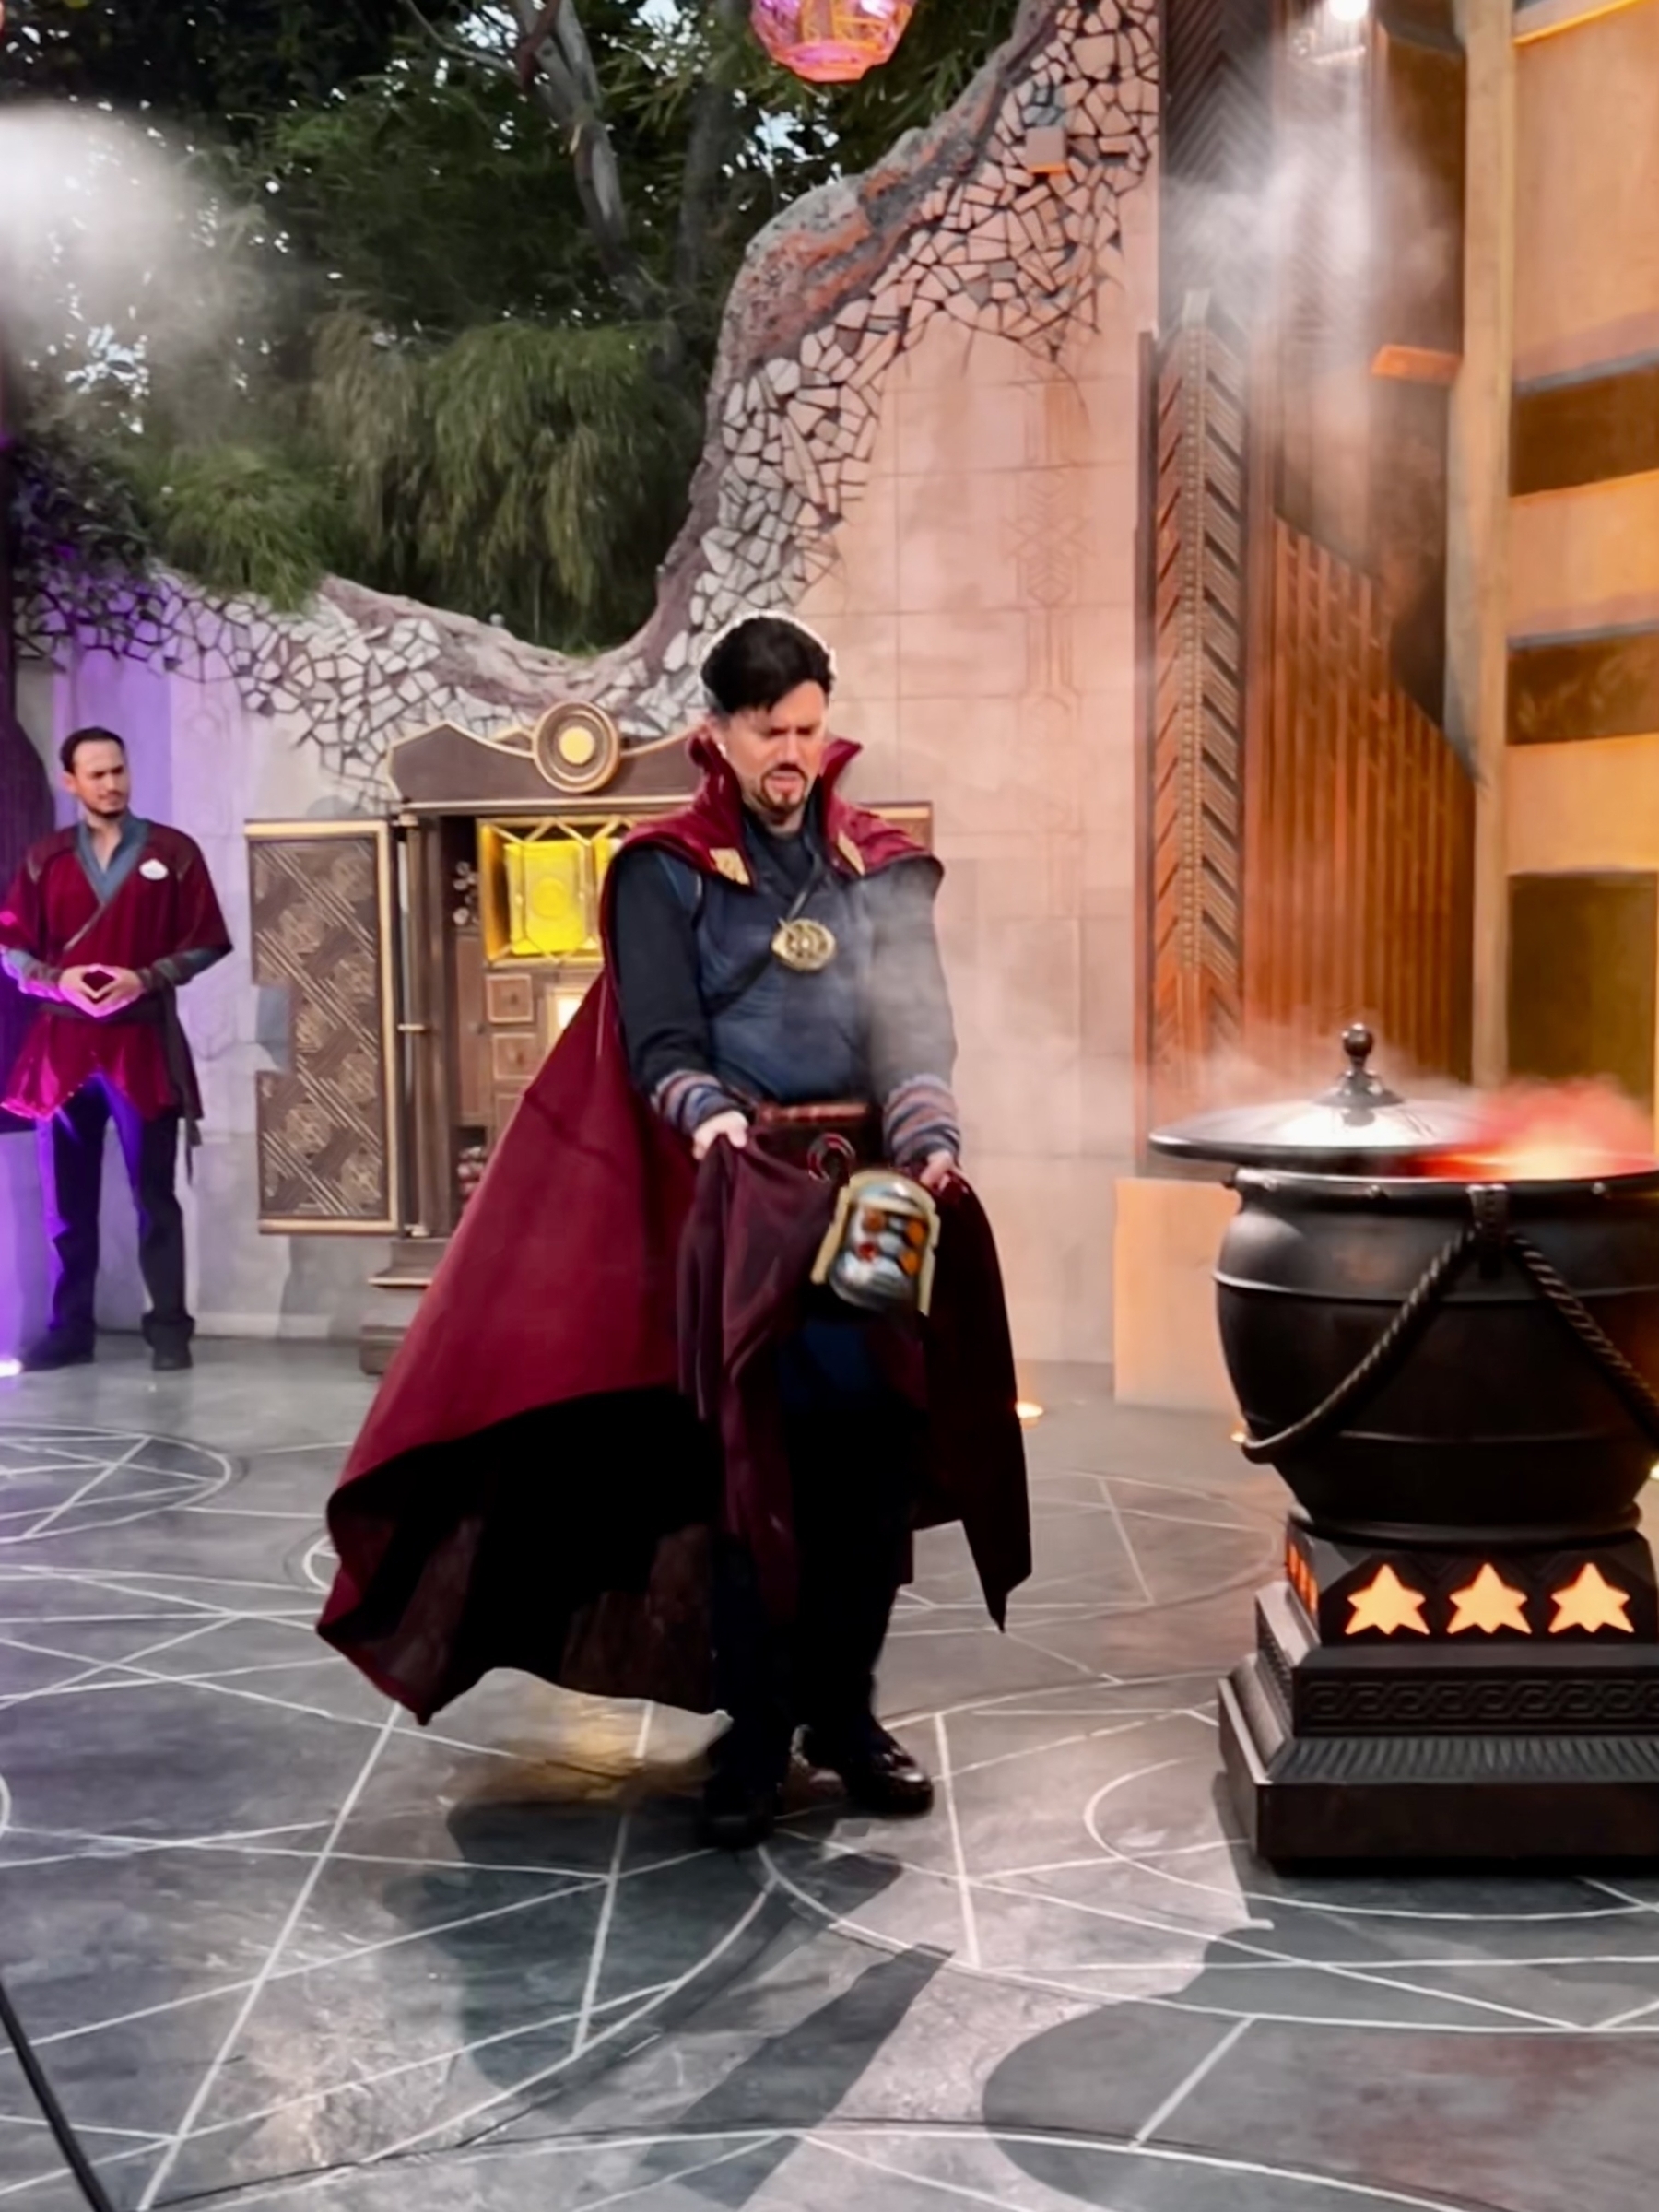 Dr. Strange at Disneyland carefully handling an object hes trying to not let loose into the crowd. 